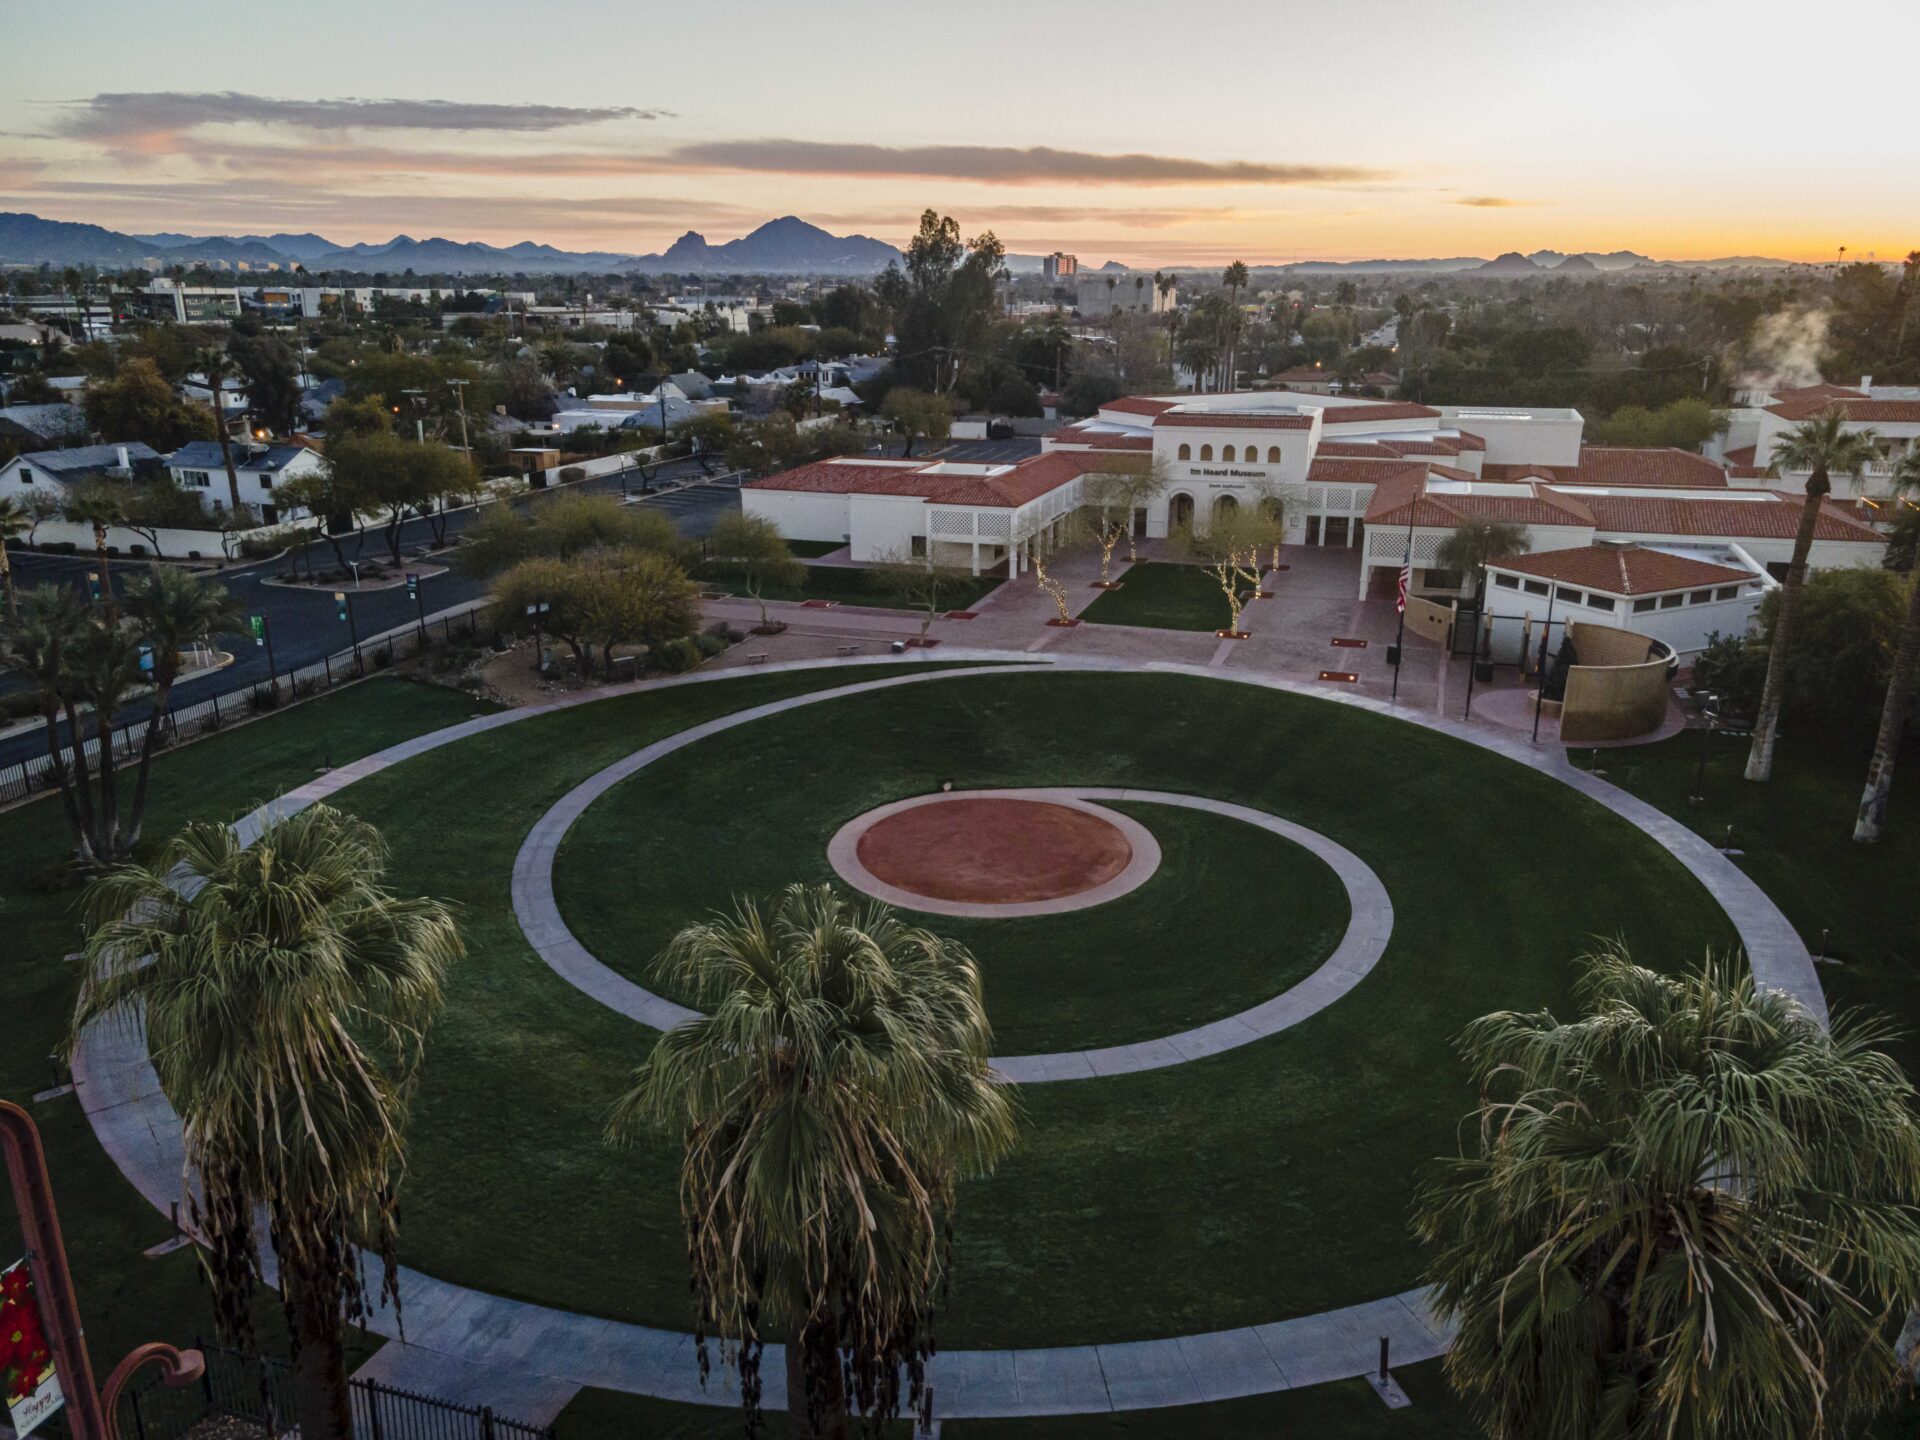 An aerial view of the Heard Museum buildings and courtyard at dawn, featuring a spiral design of pavement and green grass.